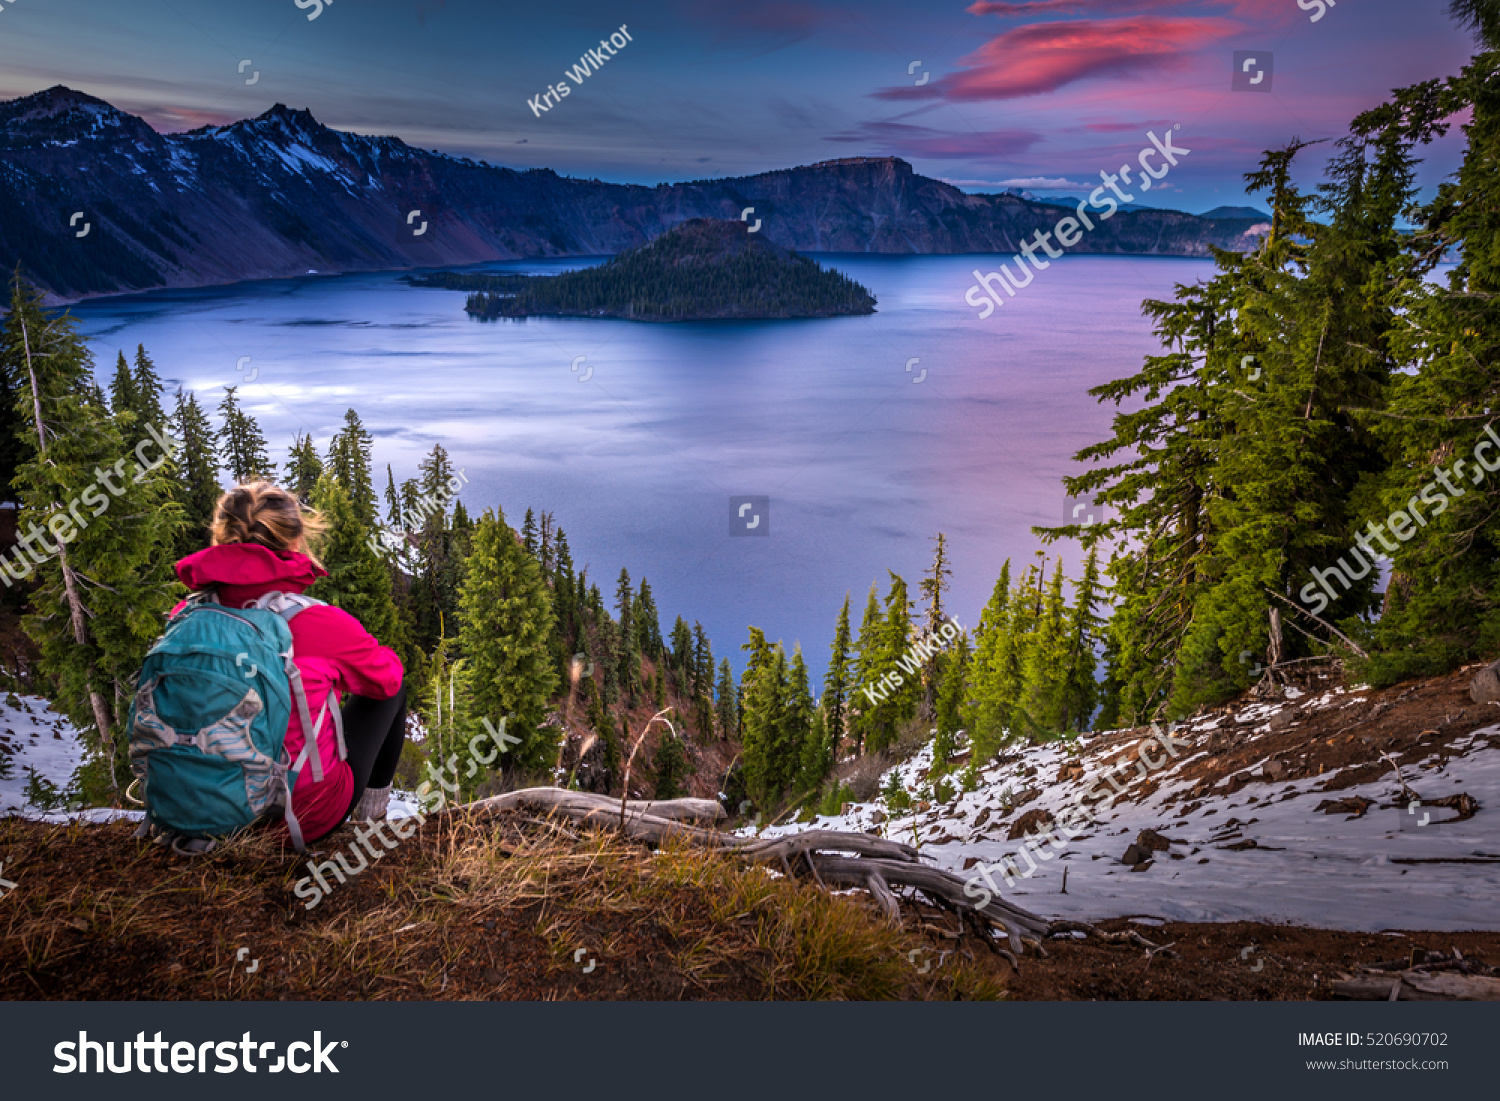 Backpacker Girl Looking at Crater Lake at Sunset Wizar Island and Watchman Peak in the Background #520690702